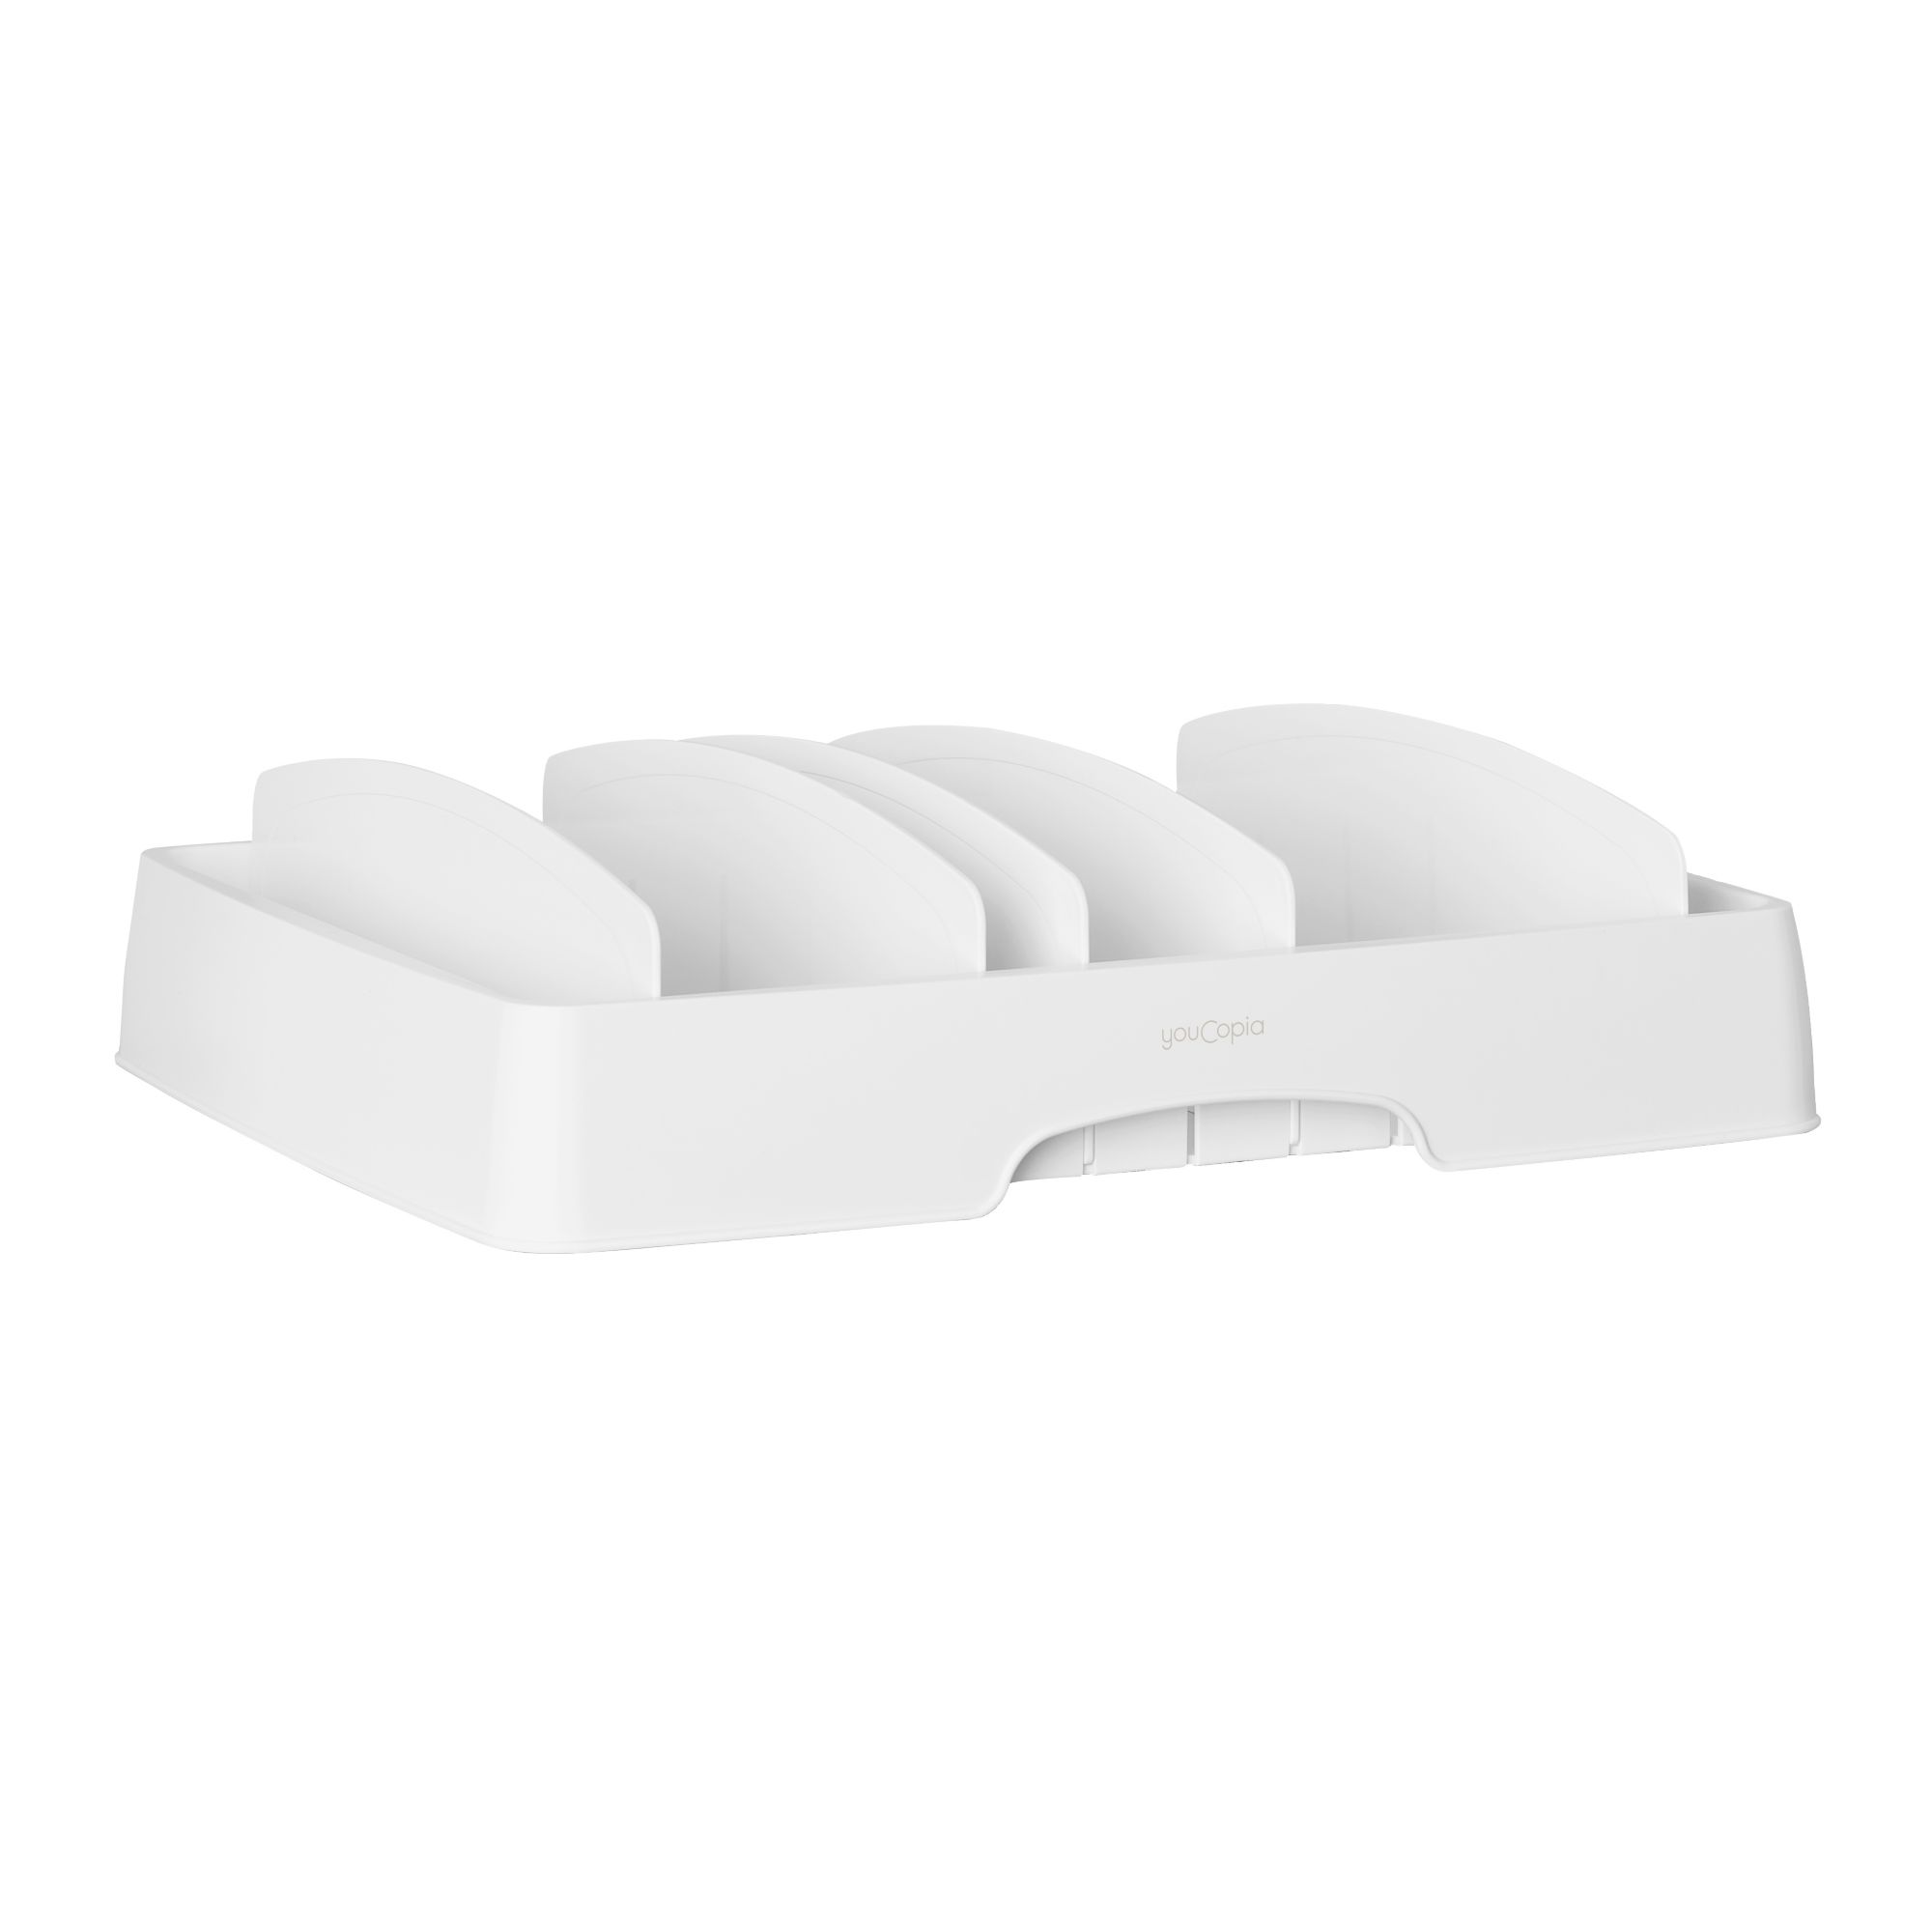 YouCopia StoraLid Container Lid Organizer, Large, White